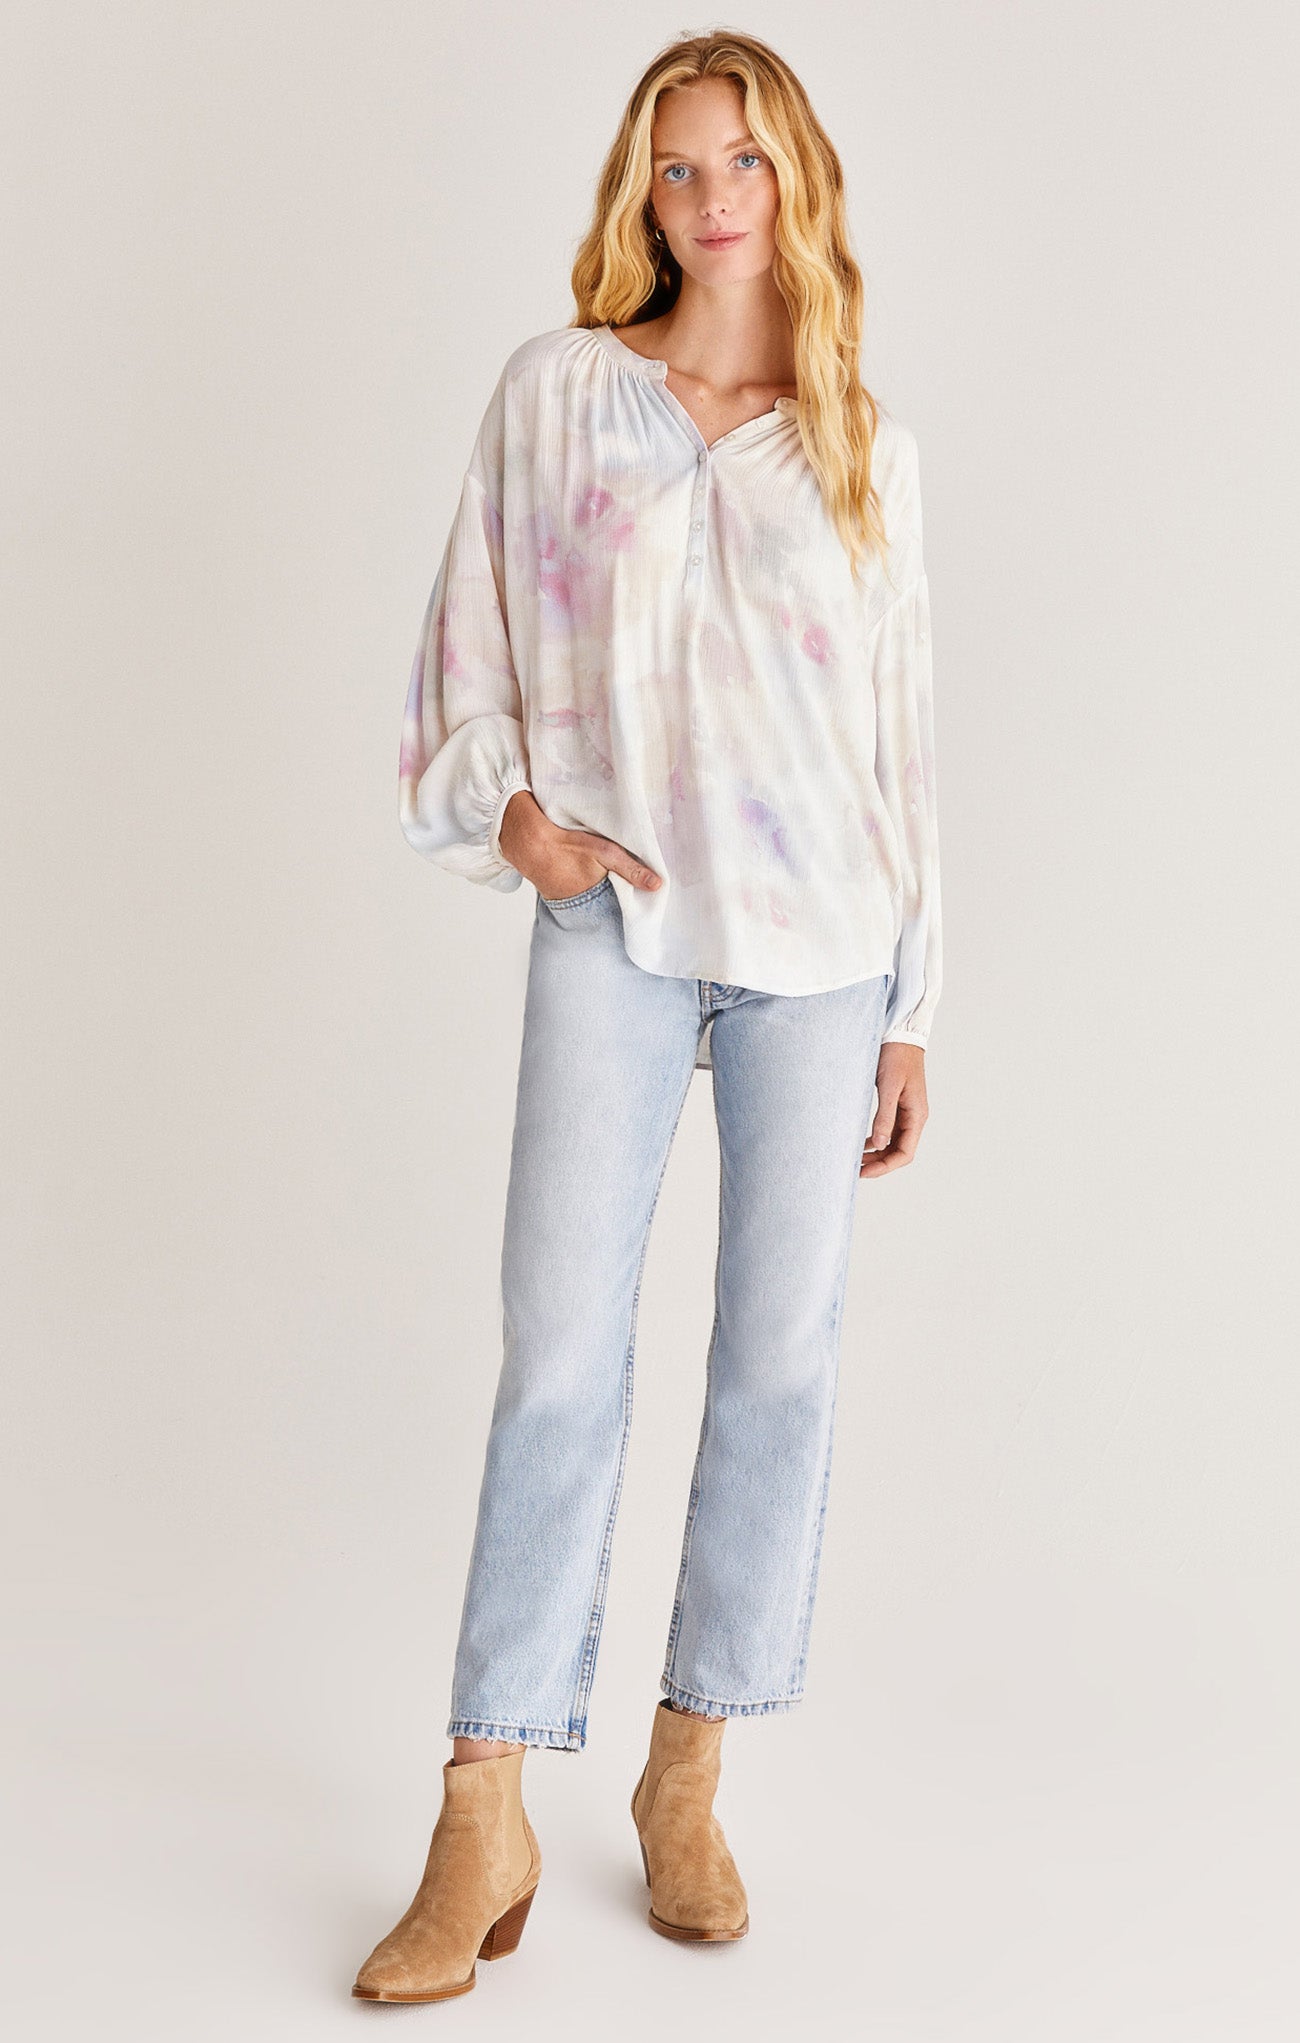 ZS Bayfront Blurred Woven Top